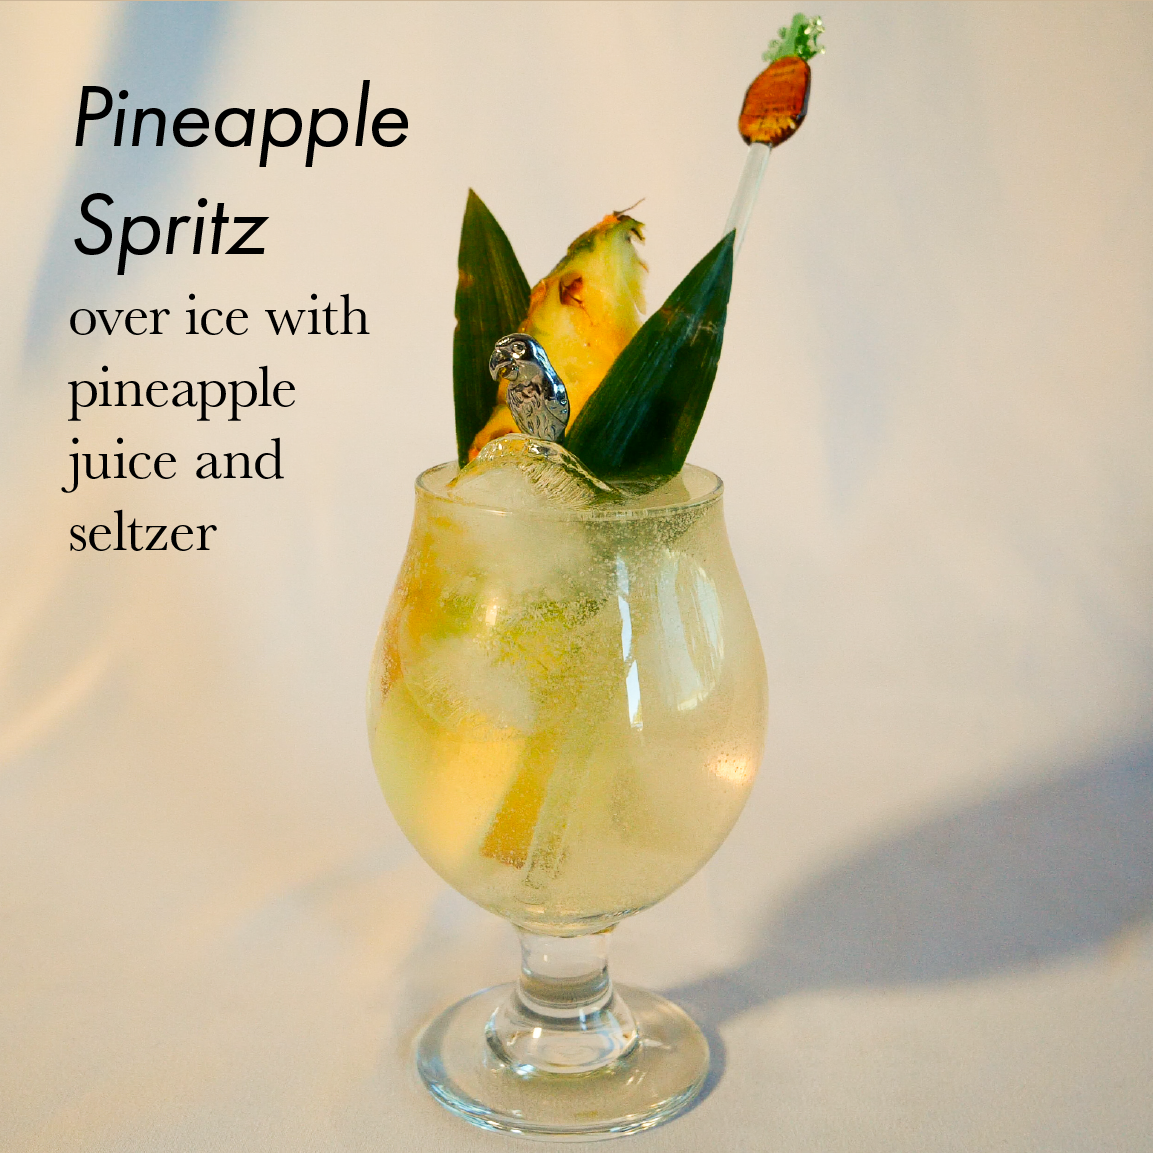 Pineapple spritz over ice with pineapple juice and seltzer